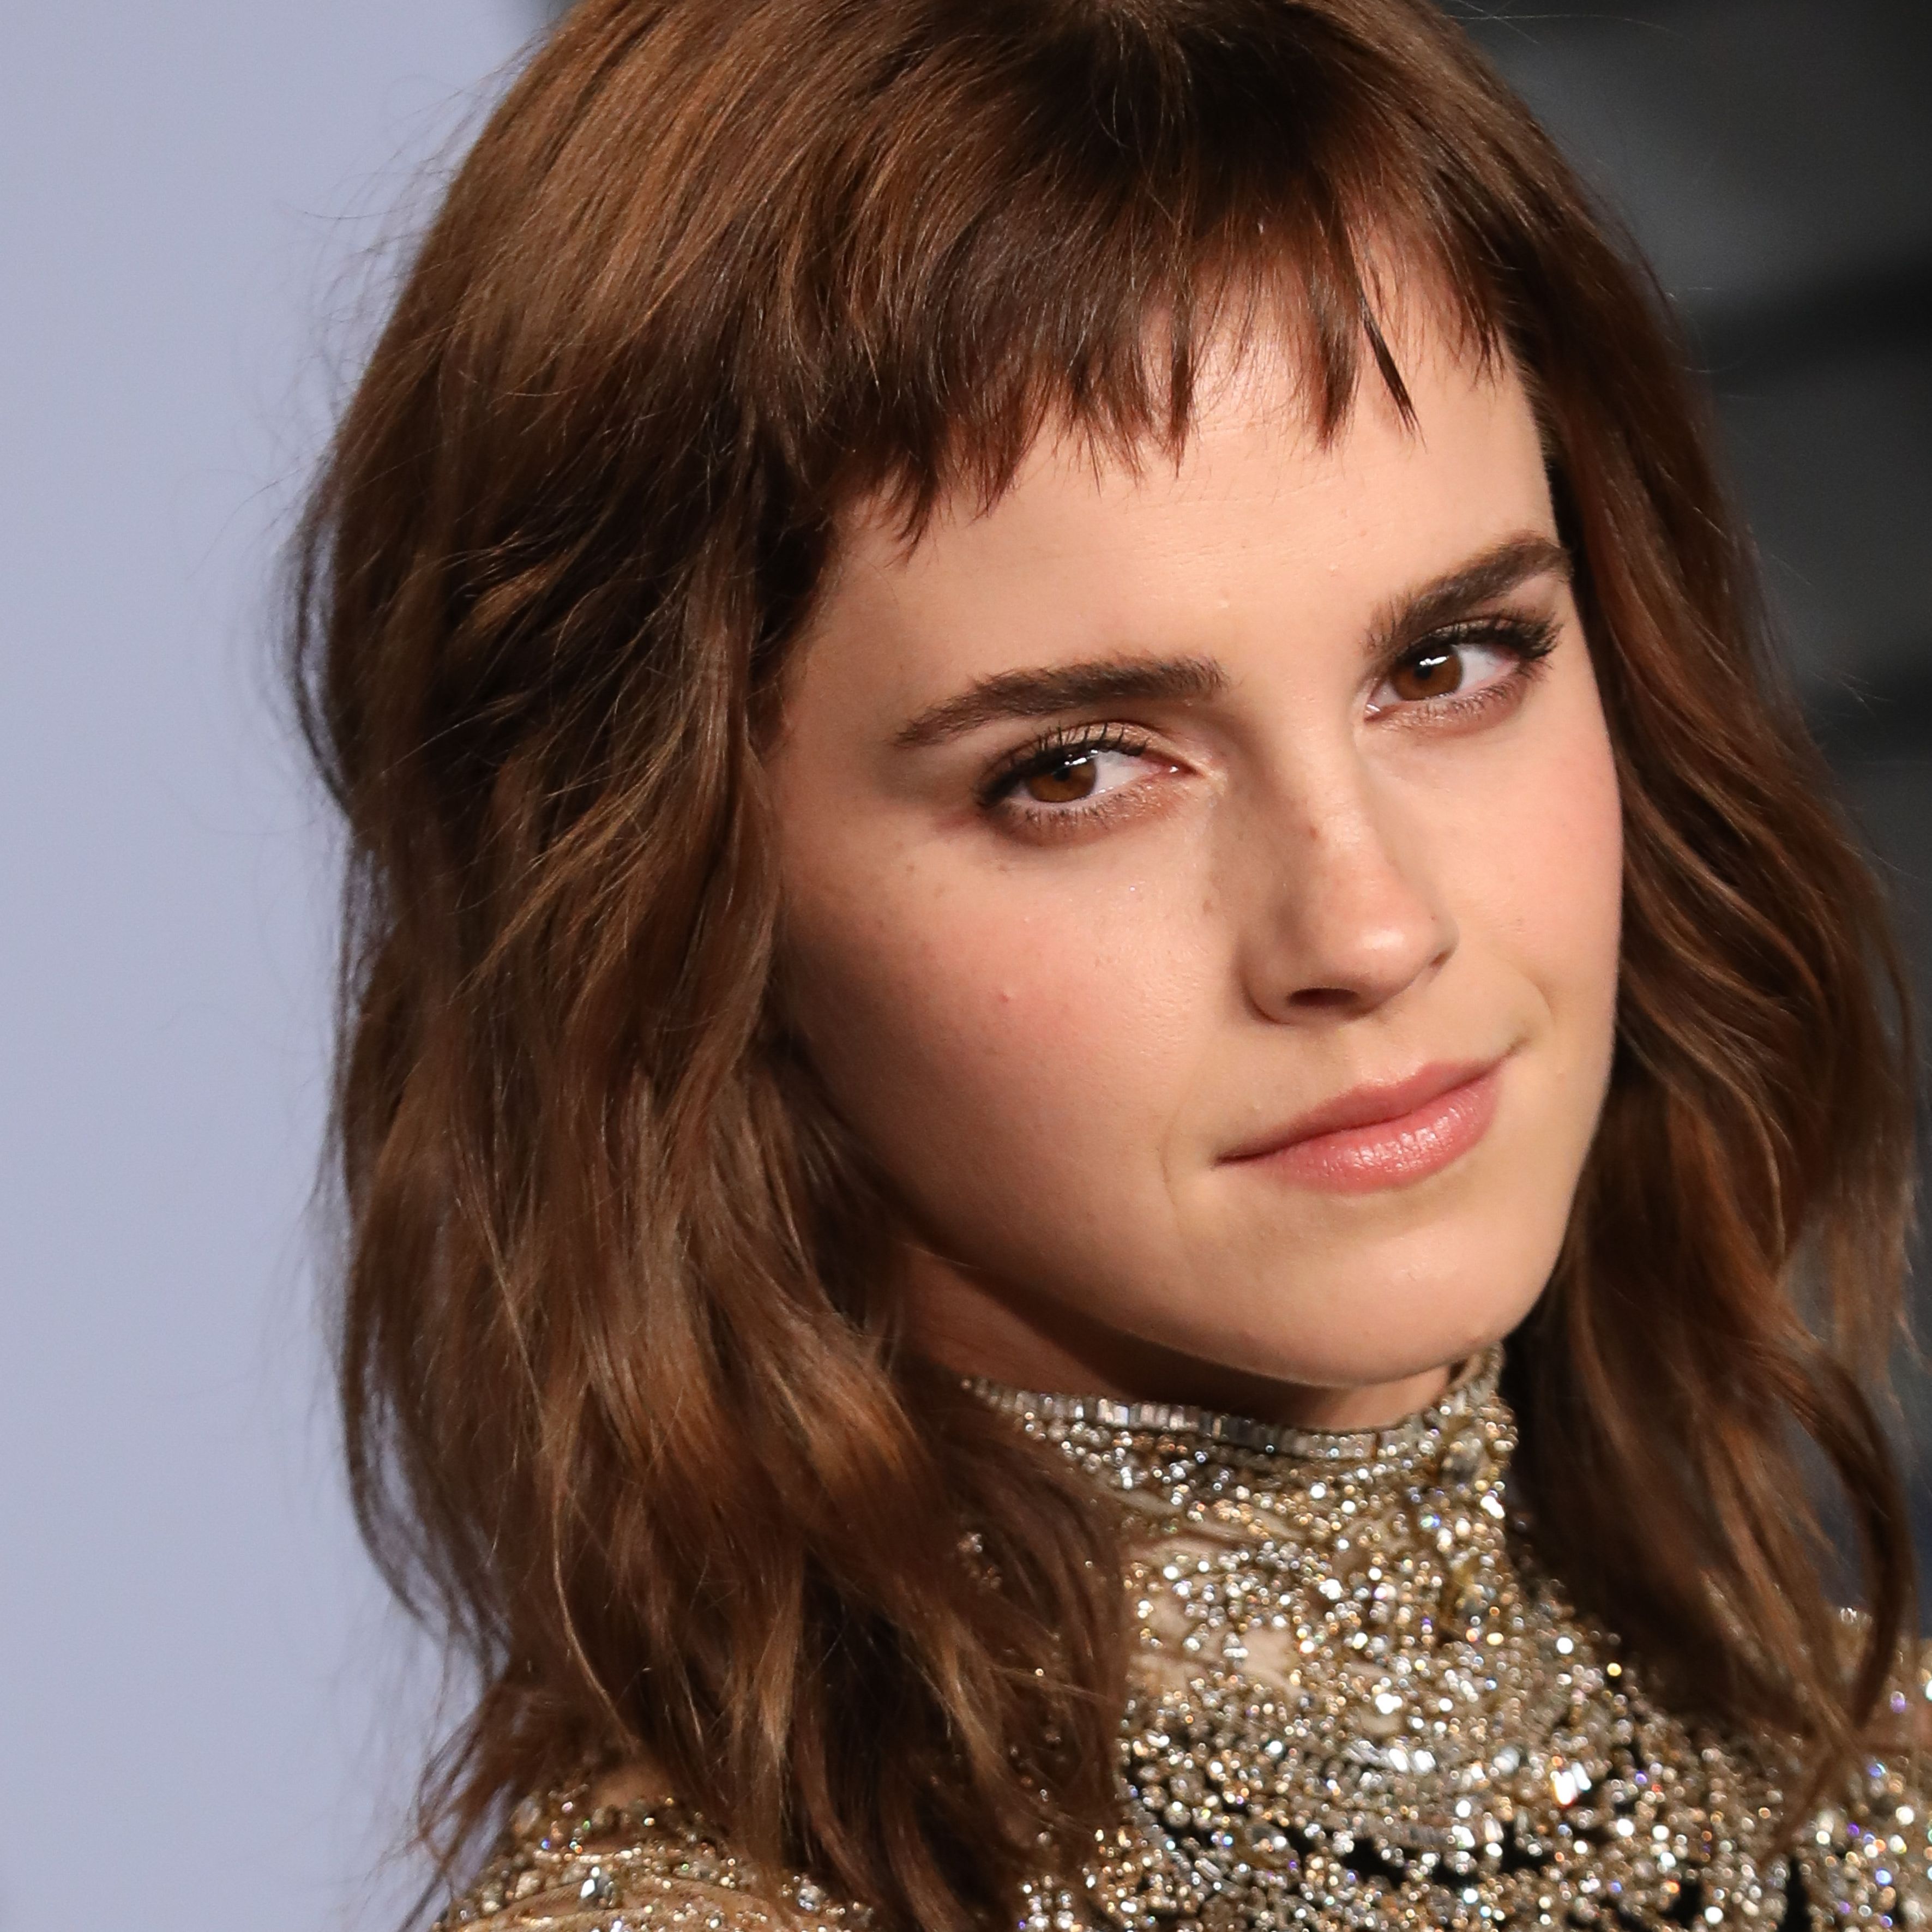 Emma Watson Transforms Her Hair With a Chic, Choppy Bob | Marie Claire